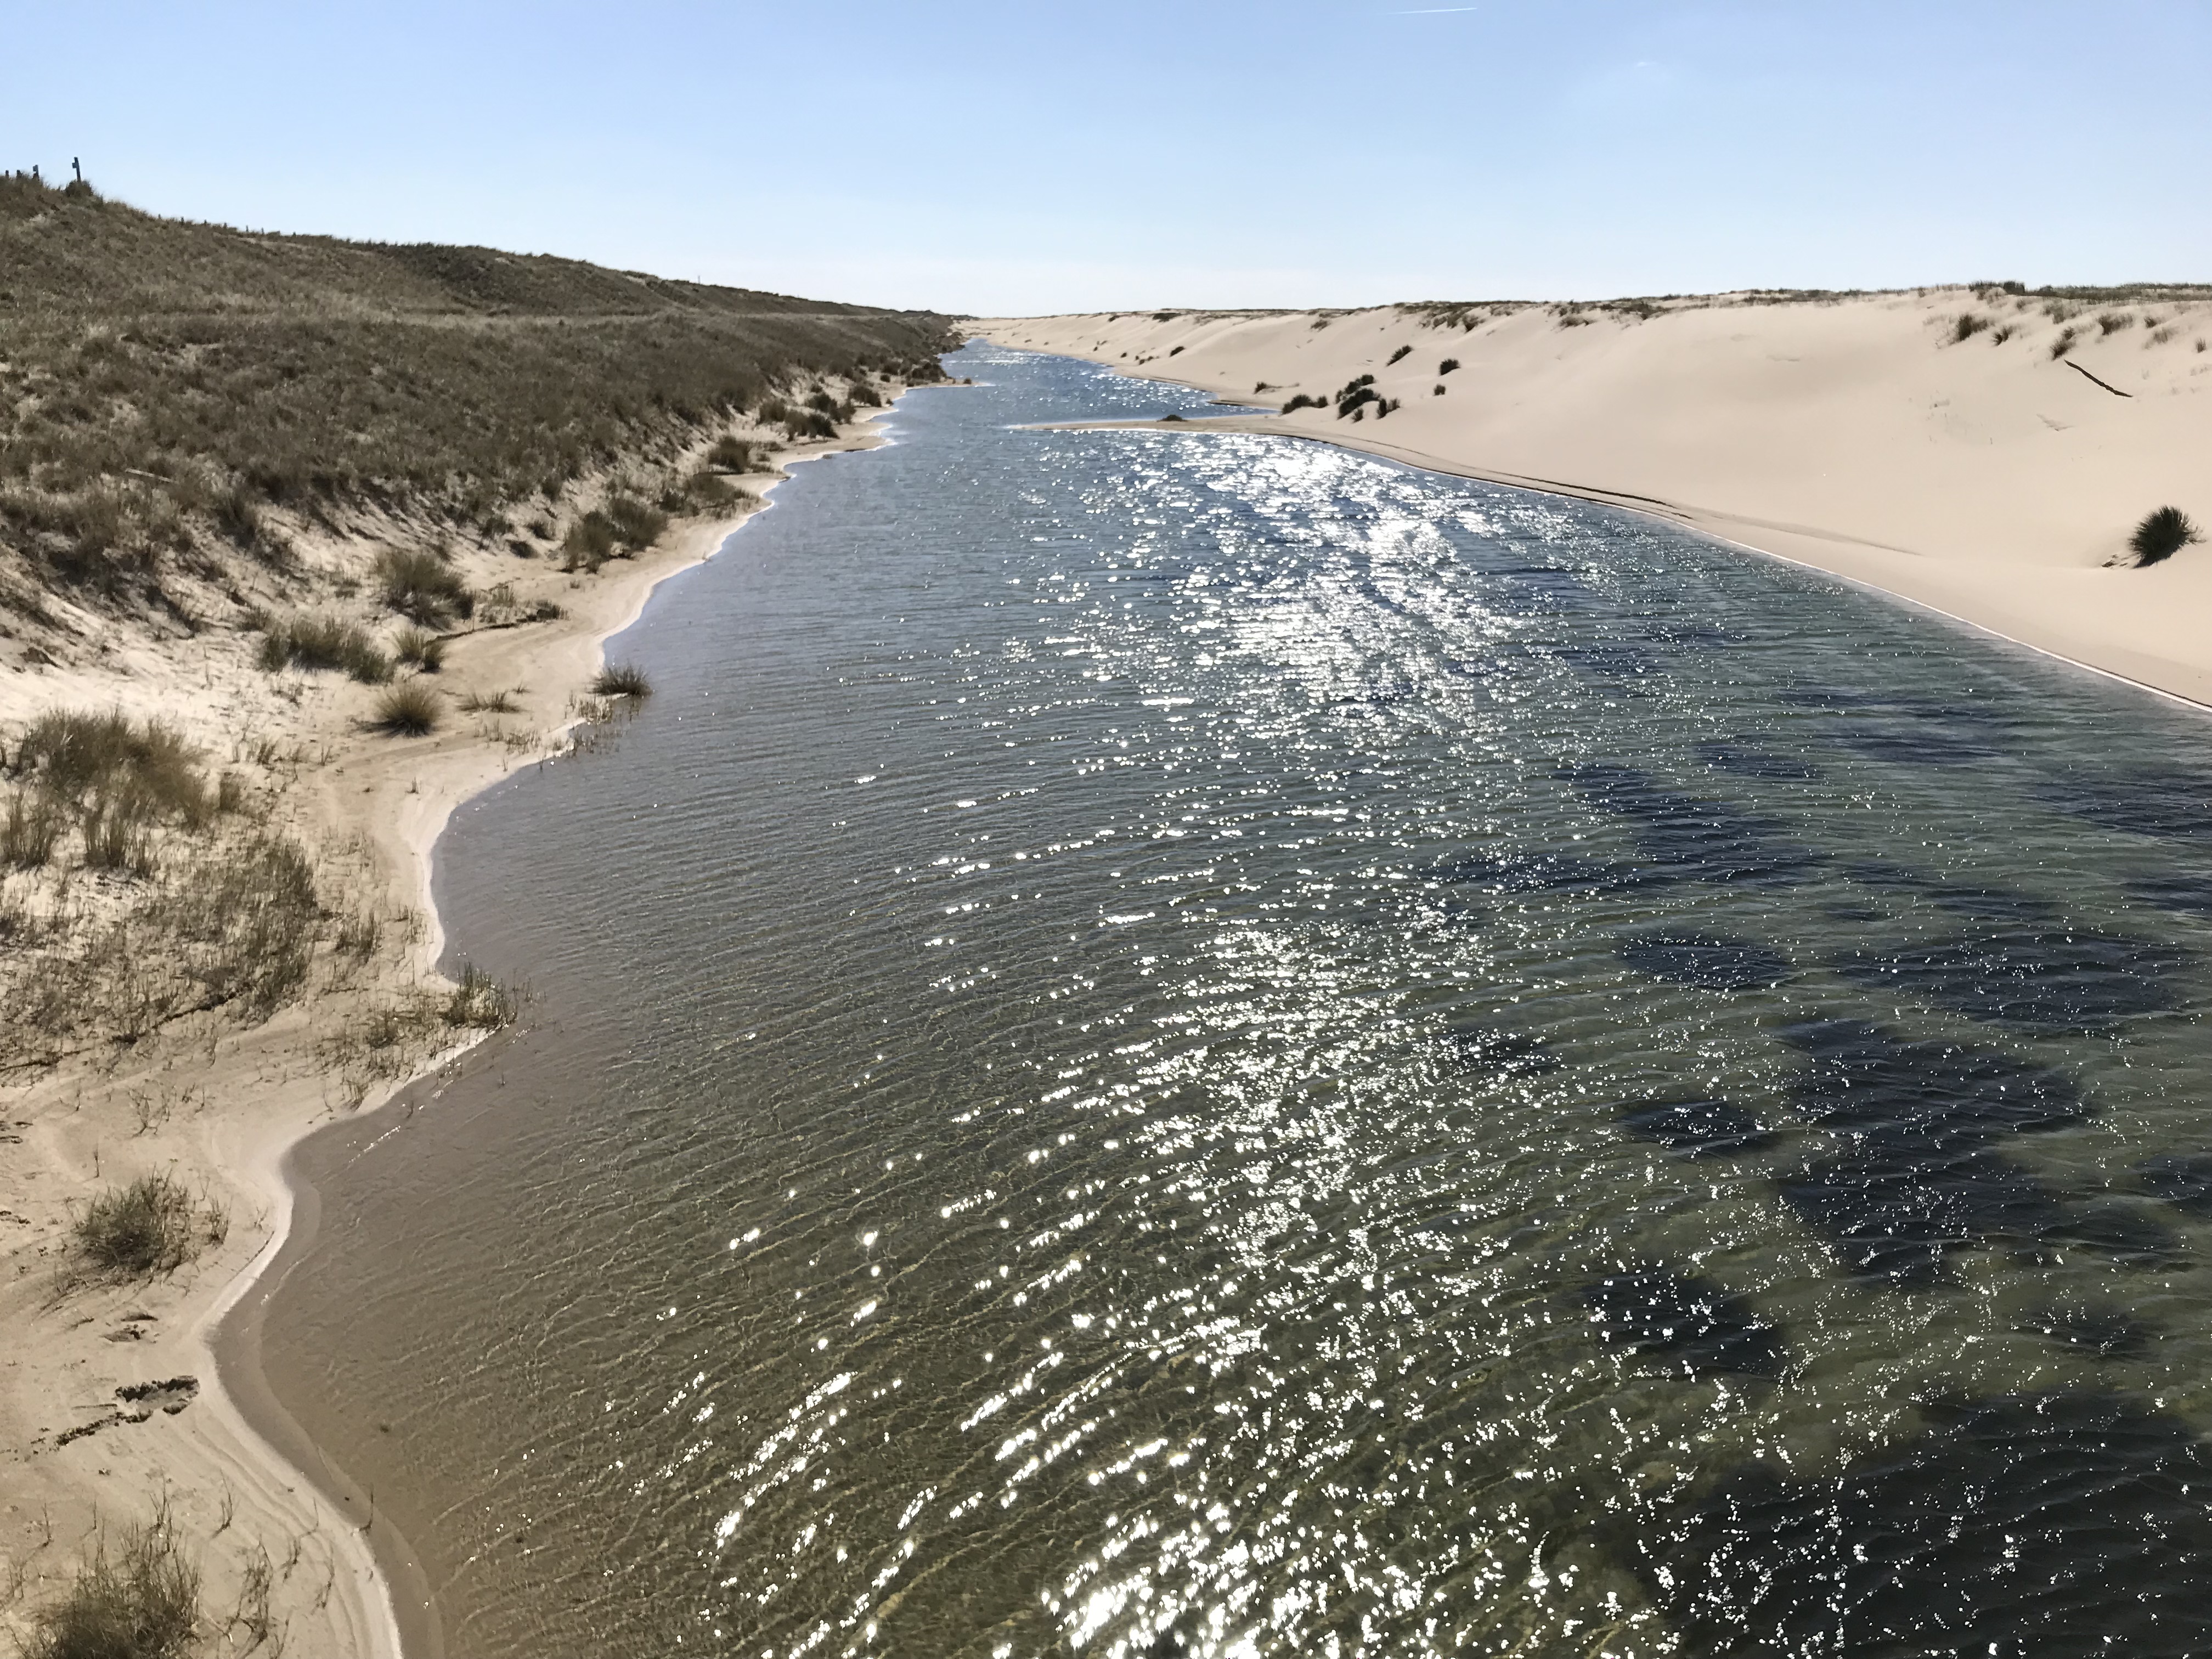 Hondsbossche dunes keep pace with rising sea level